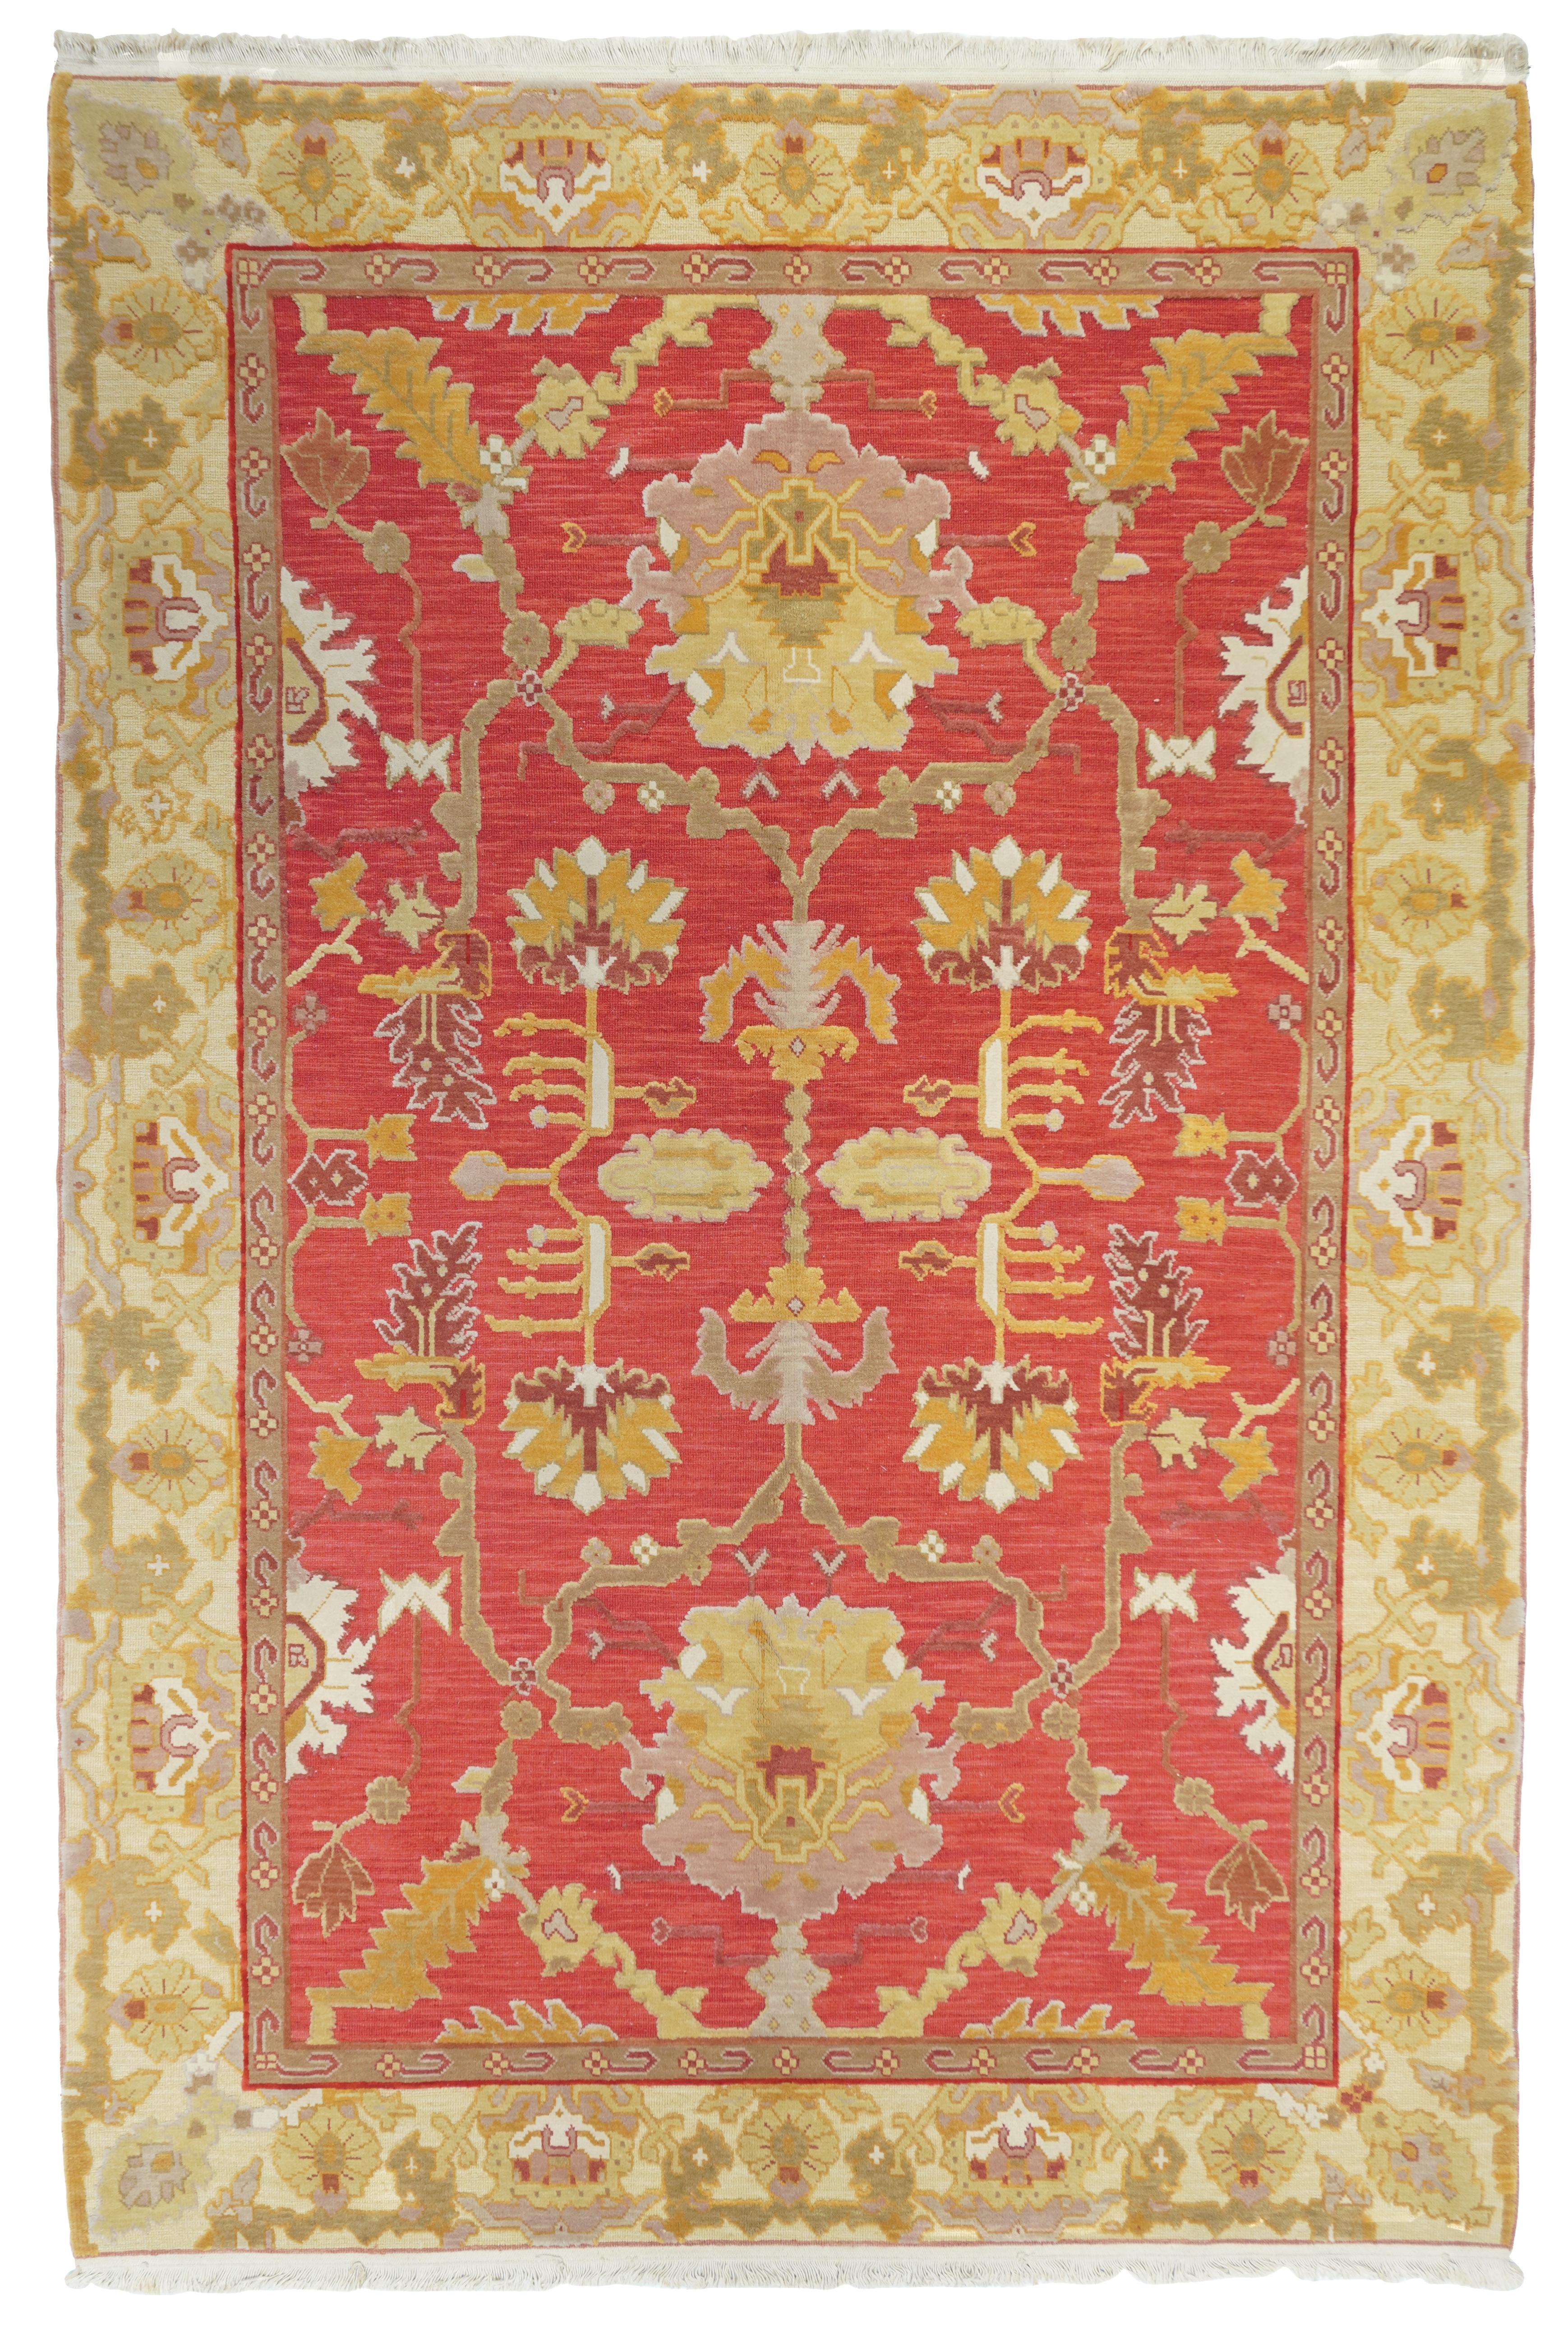 Soumak (also spelled Soumakh, Sumak, Sumac, or Soumac) is a tapestry technique of weaving strong and decorative textiles used as rugs and domestic bags. Baks used for bedding are known as Soumak Mafrash. Soumak is a type of flat-weave, somewhat